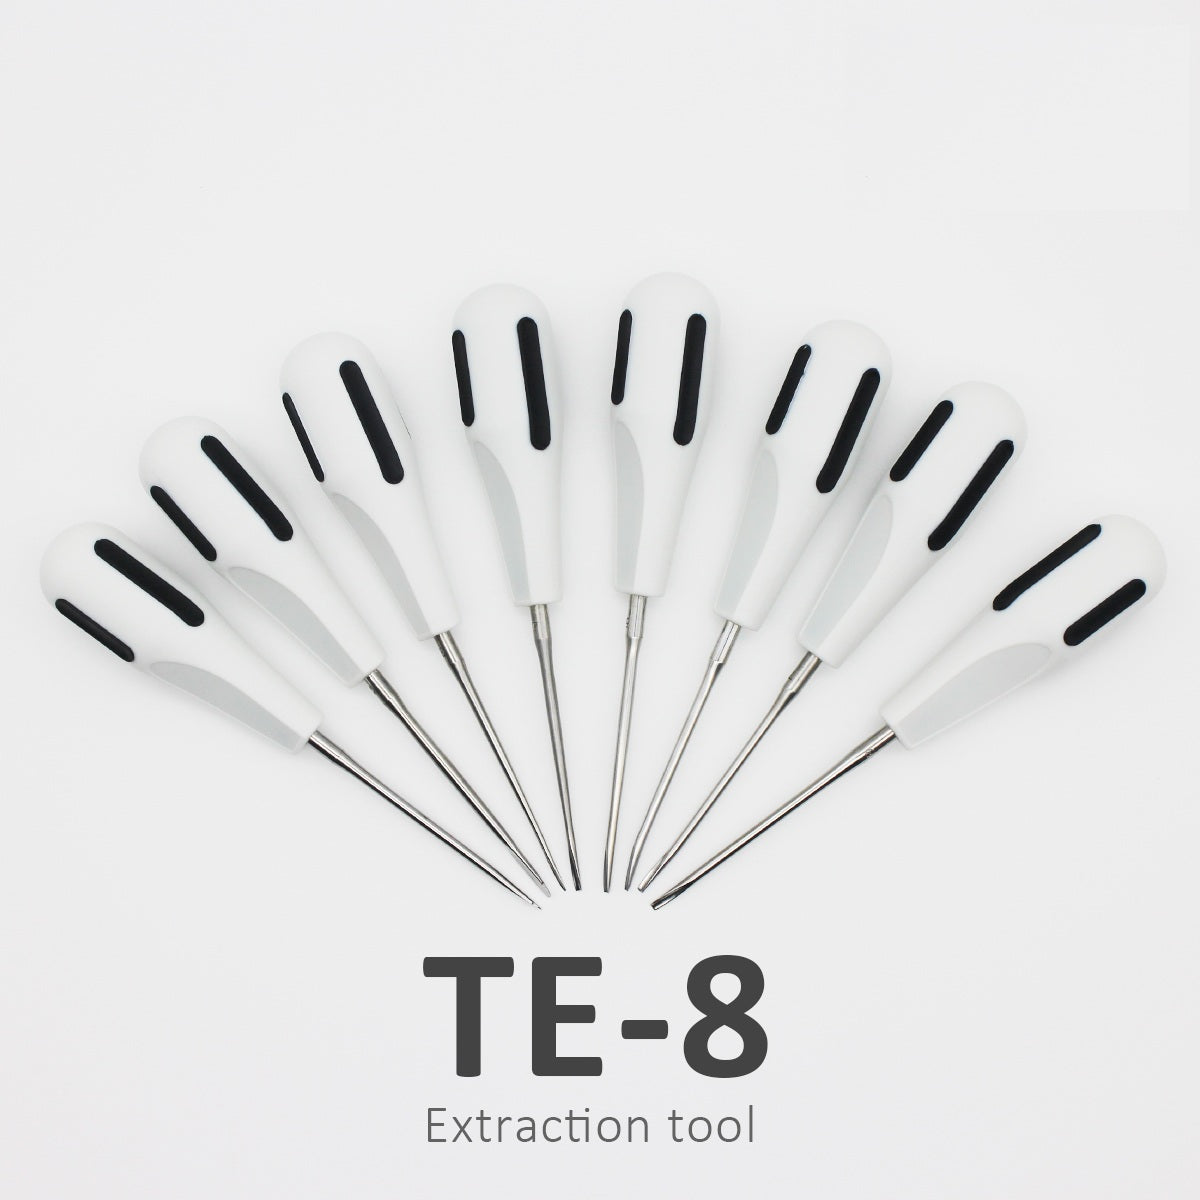 PROTECTOR Tooth Extraction Elevators Kit Dental Minimally Invasive Forceps Stainless Steel Oral Surgery Tools Dentist Lab Tools